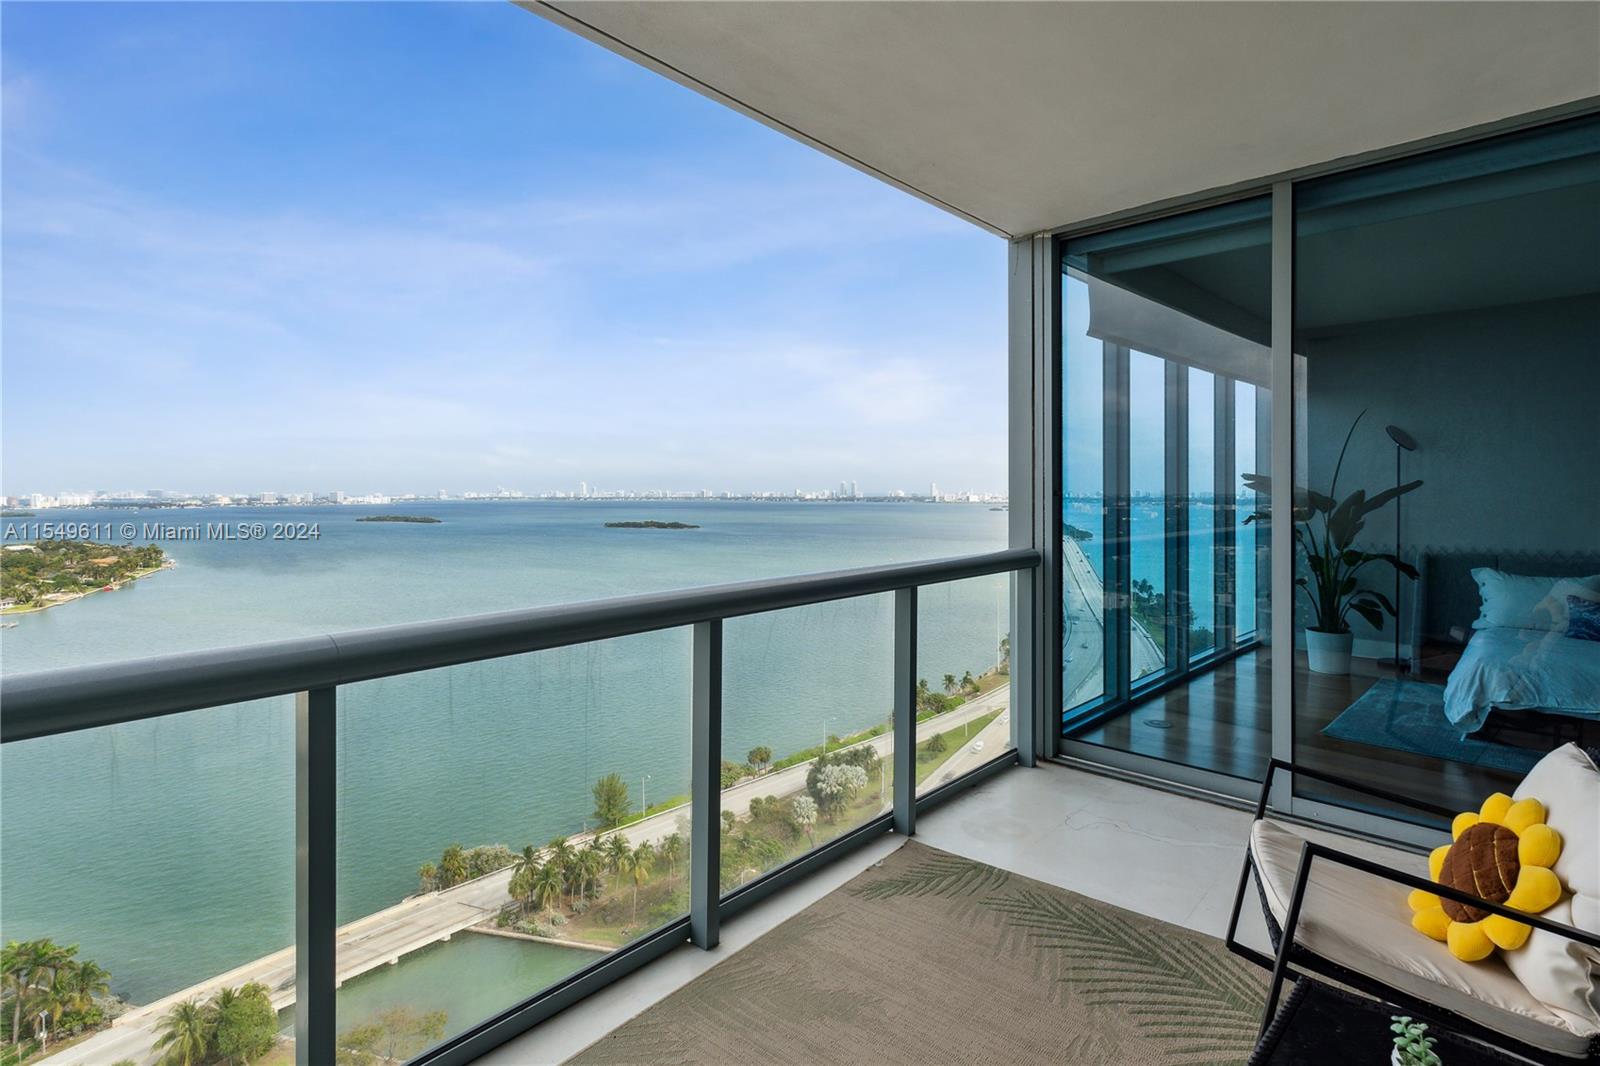 Discover luxury living in this stunning 2-bedroom, 2.5-bathroom condo boasting unrivaled views of the Miami skyline & Biscayne Bay. The expansive floor plan features 9-ft floor-to-ceiling glass windows that illuminate the modern finishes. Step into the open kitchen, equipped with stainless steel appliances. Take advantage of the walk-in closet & large balcony, offering breathtaking & unobstructed waterfront views. Resort Style amenities include a gym, 2 pools, hot tubs, theater, sauna, game room, business center, bbq area, & more. The location is minutes from the Design District, and provides easy access to the vibrant downtown, Brickell, & airport. With Miami Beach just moments away, this residence offers luxury & convenience in the heart of Miami. 1 assigned parking space + 1 valet.